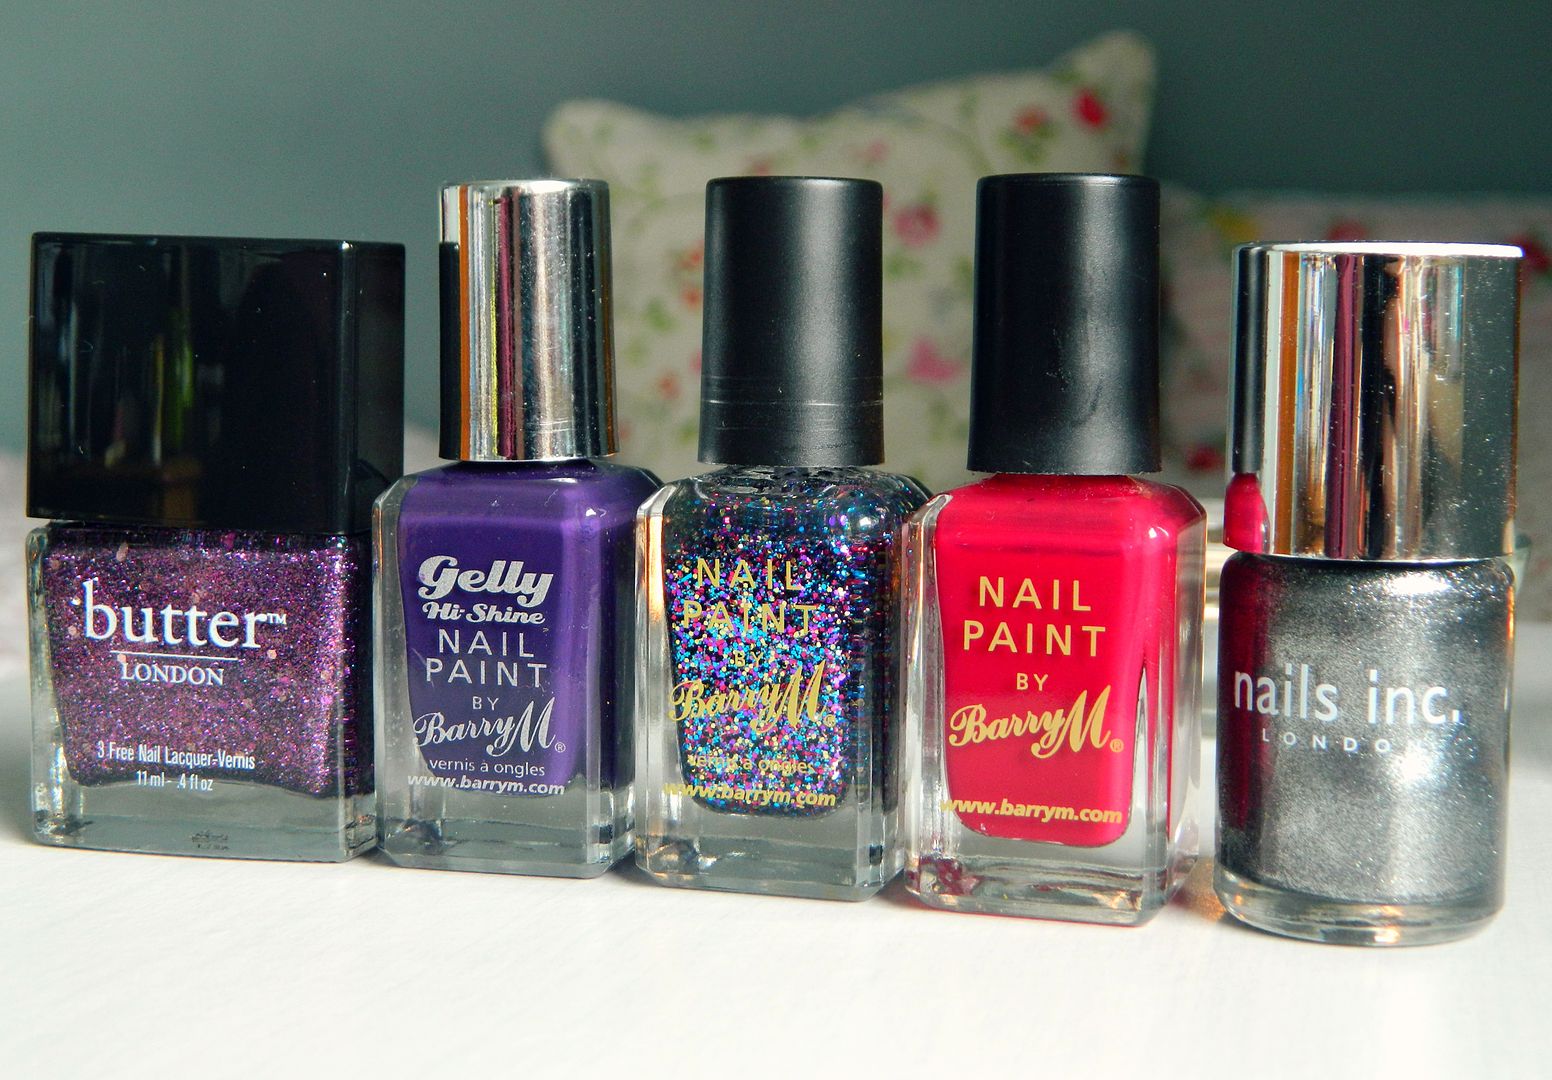 Autumn Fall winter Nail Polishes 2013 Butter London Barry M Nails Inc Belle-amie UK Beauty Fashion Lifestyle Blog